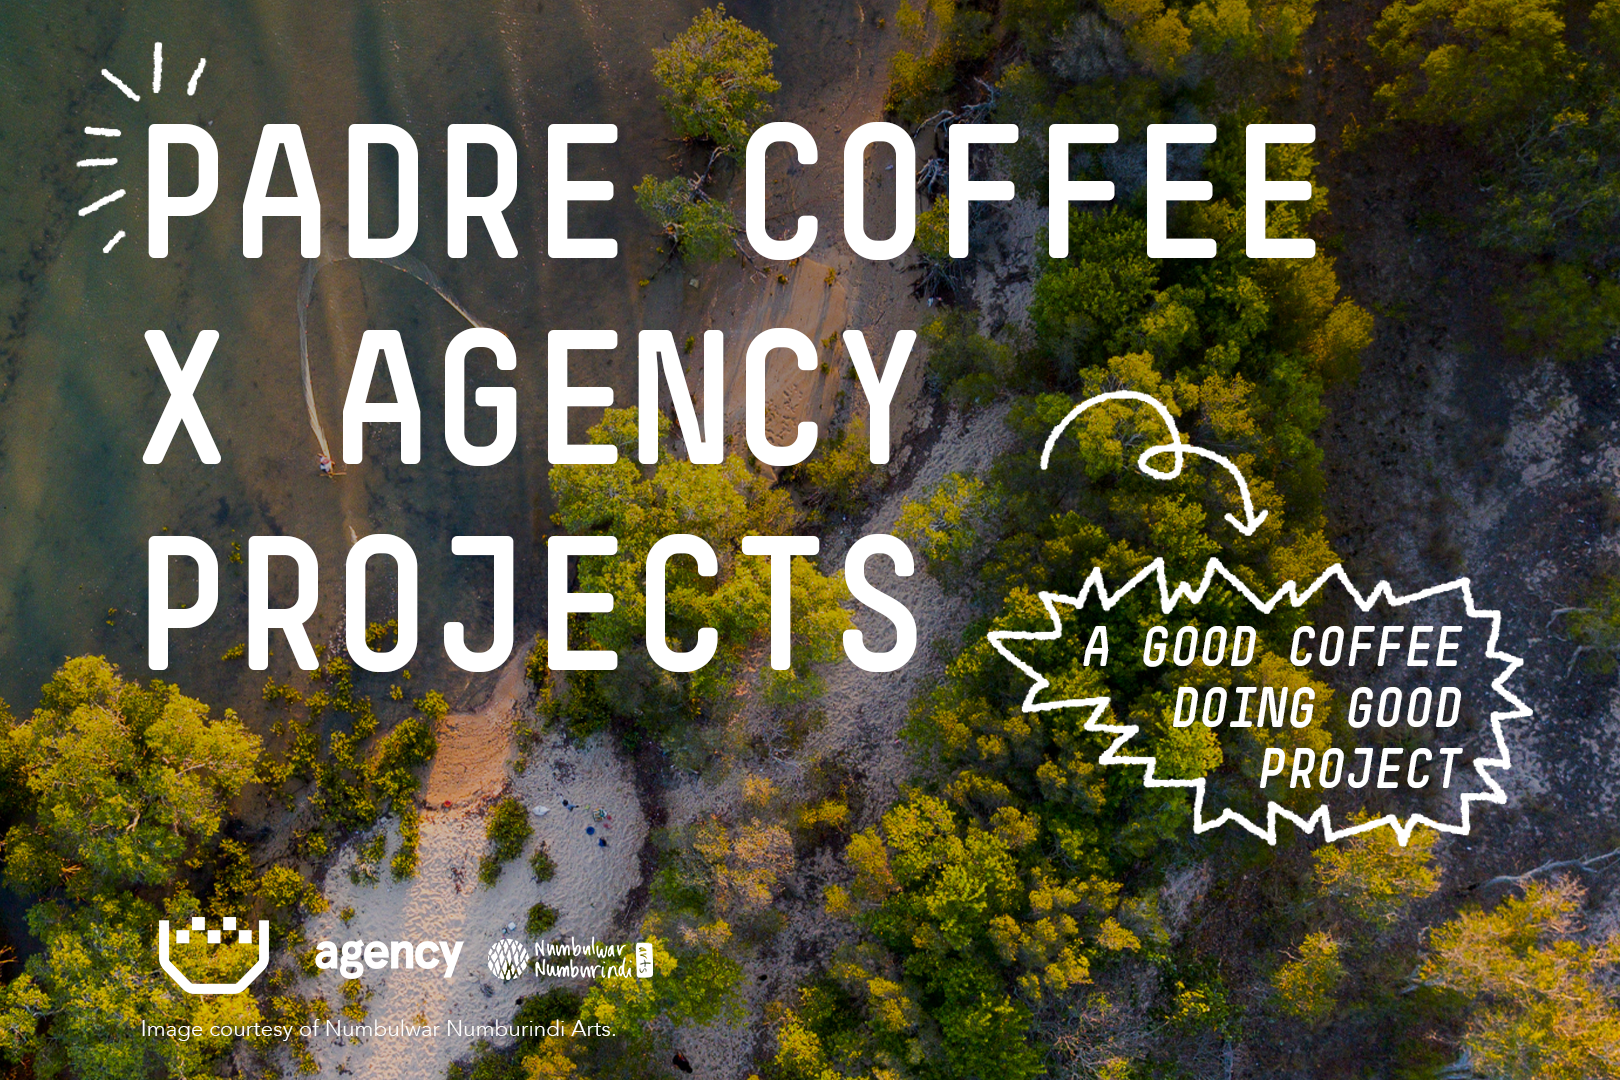 Good Coffee Doing Good - Caring For Country - With Agency